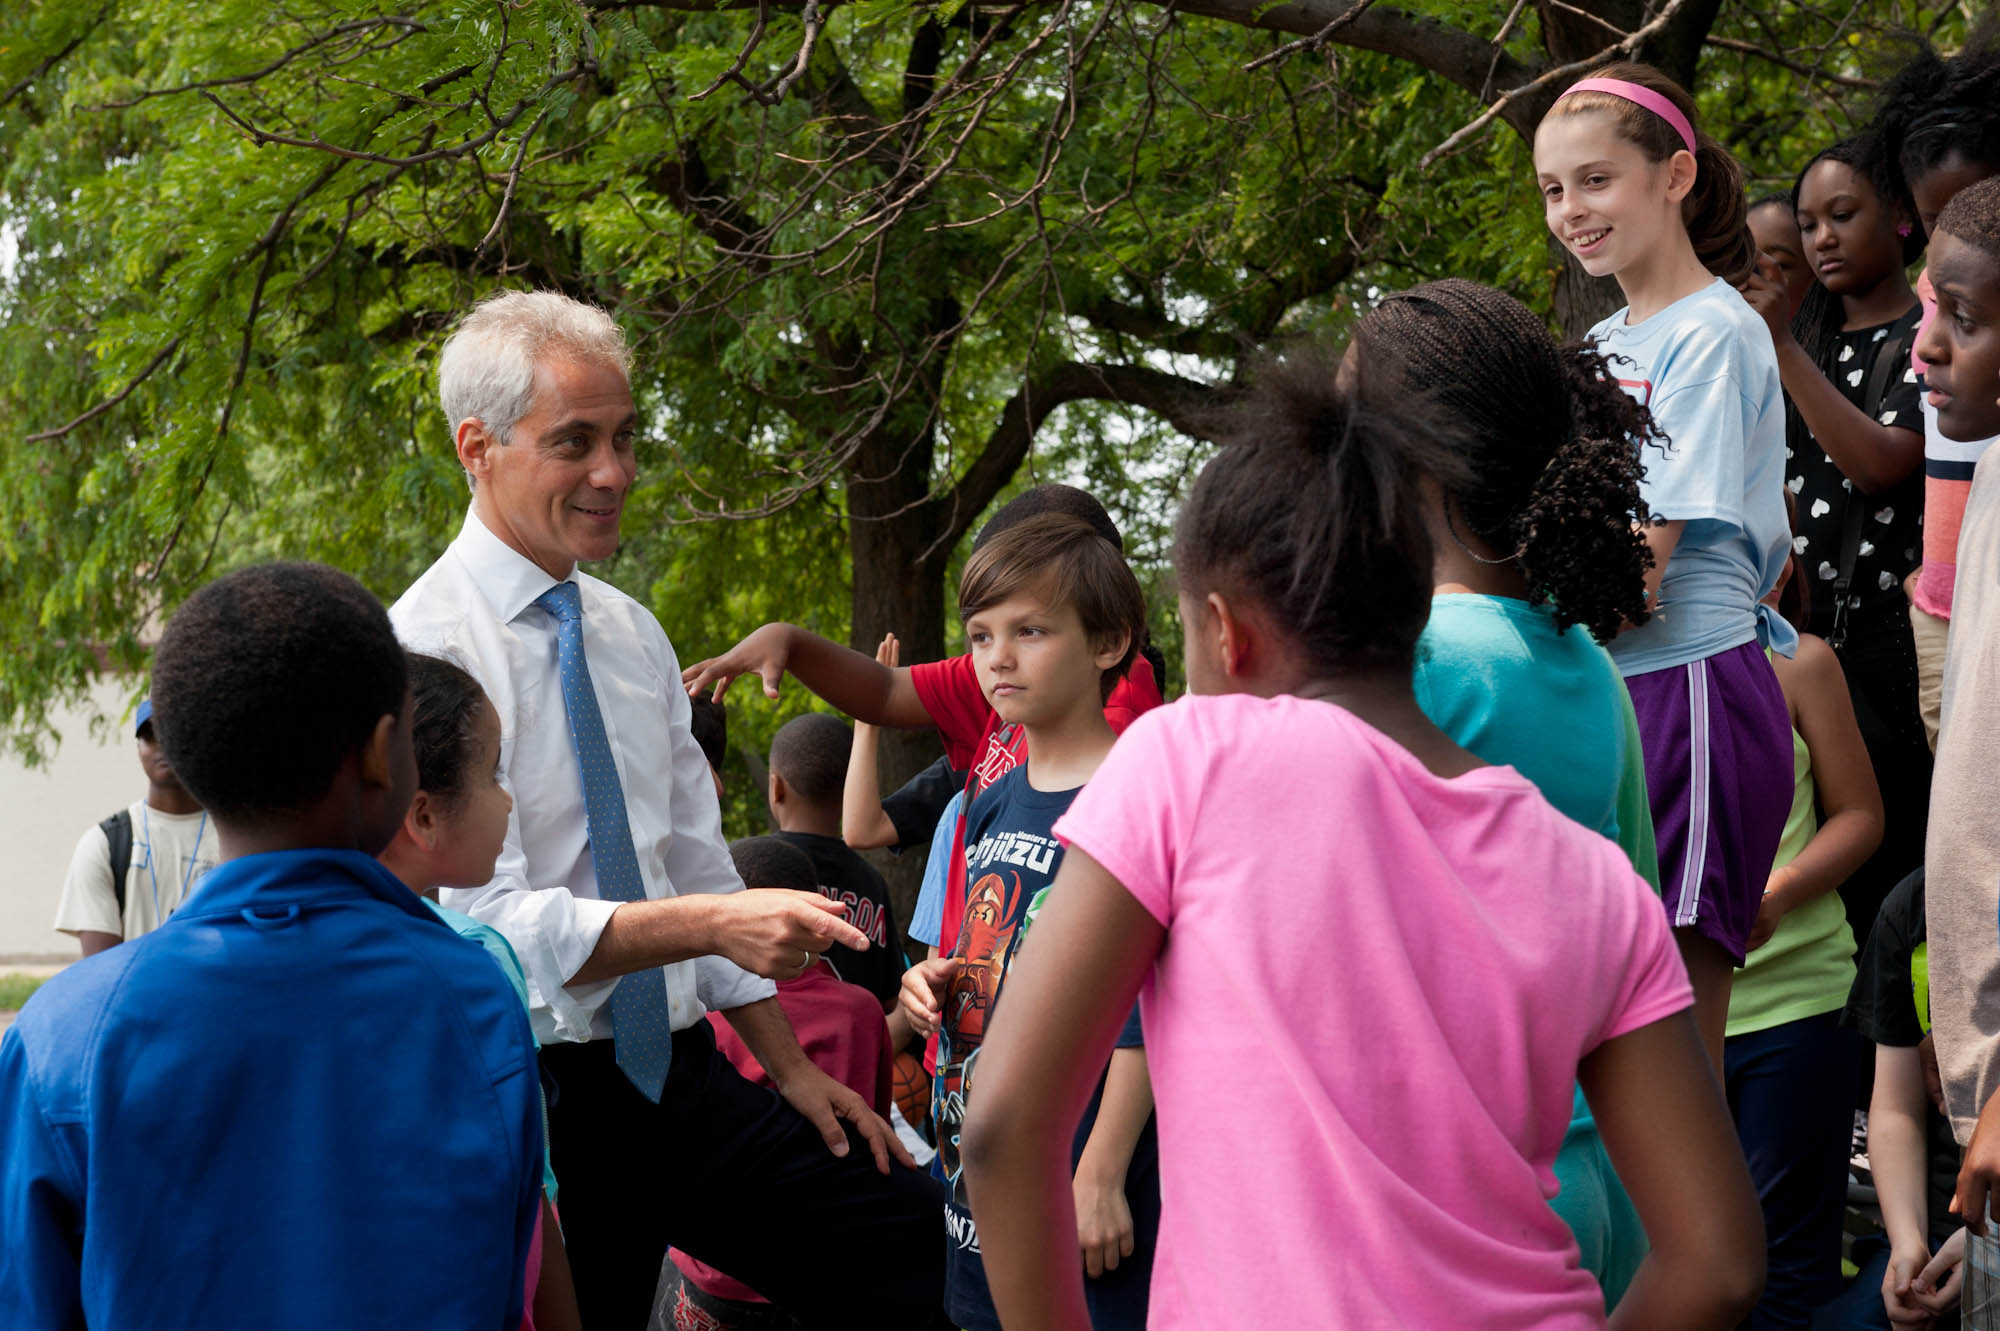 Mayor Emanuel joins young Chicagoans on the first day of Parks programming this summer